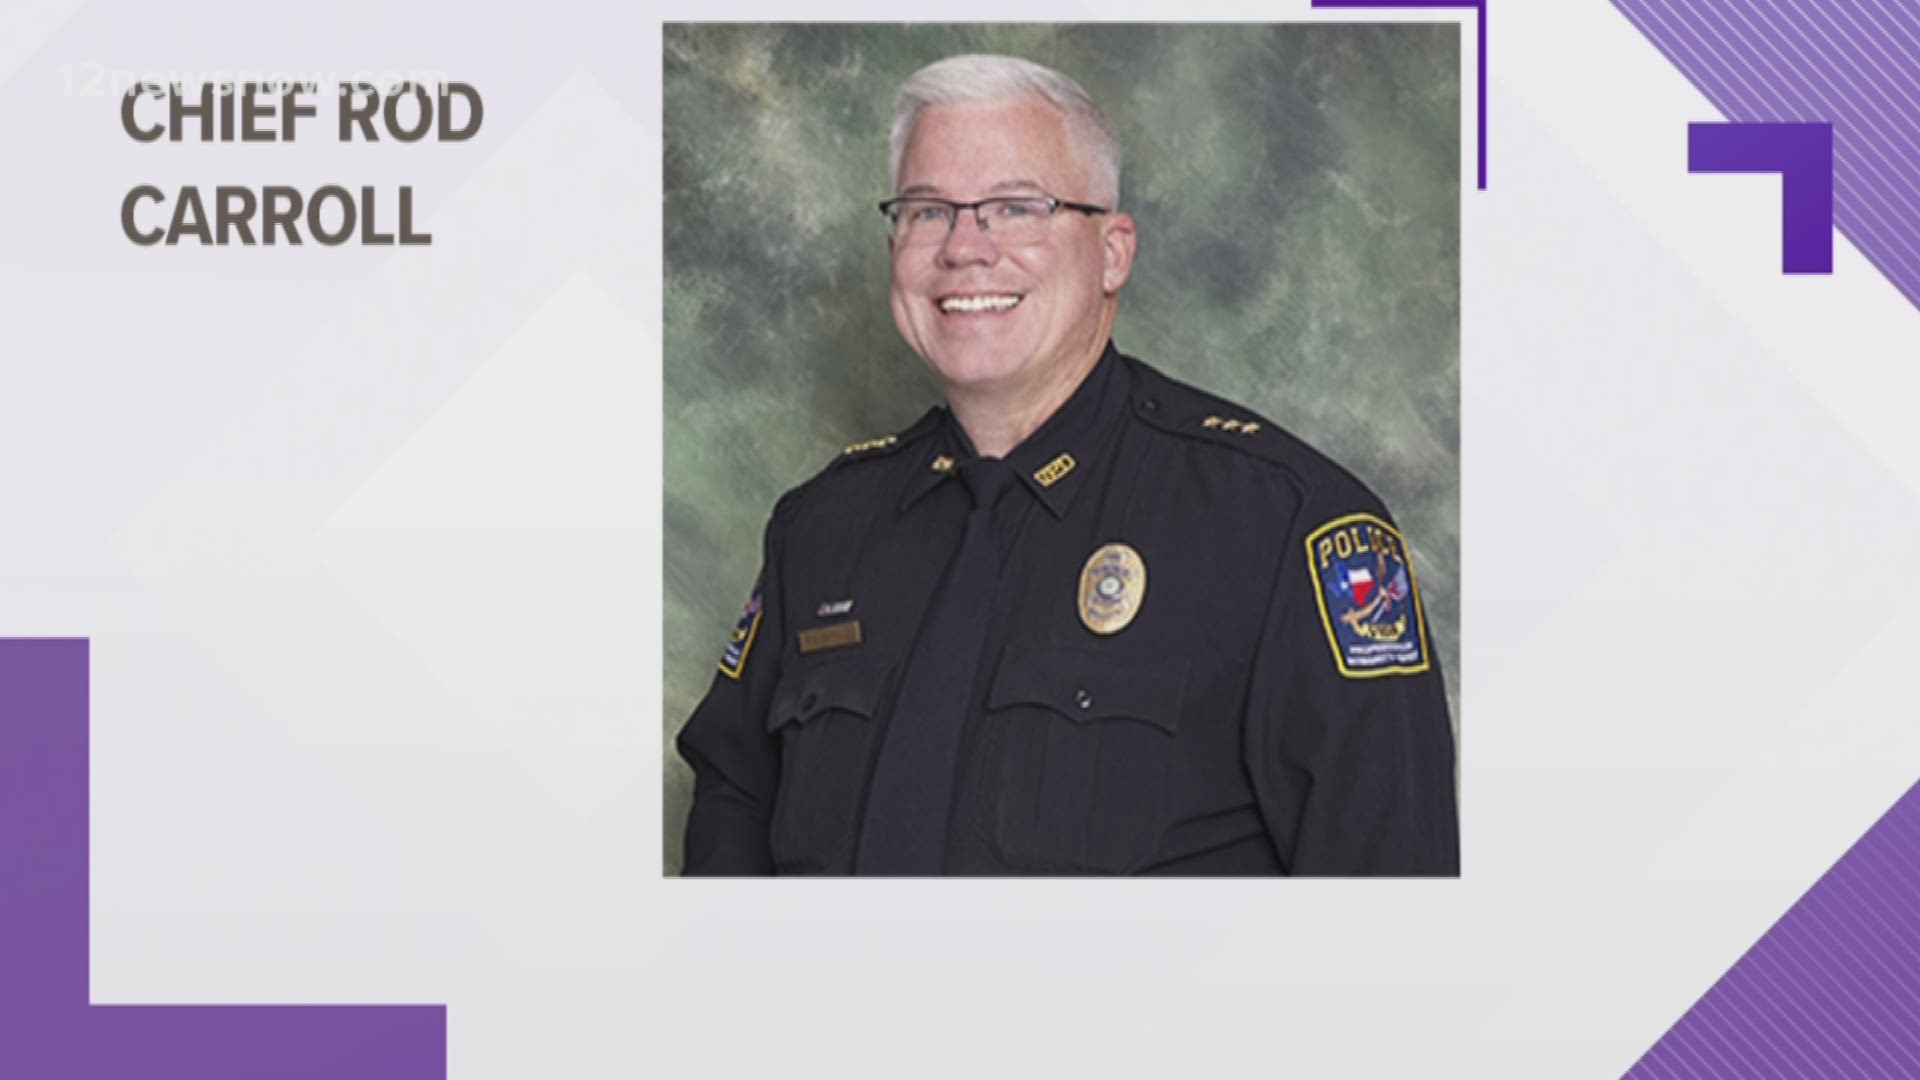 Rod Carroll has 31 years of experience in law enforcement.